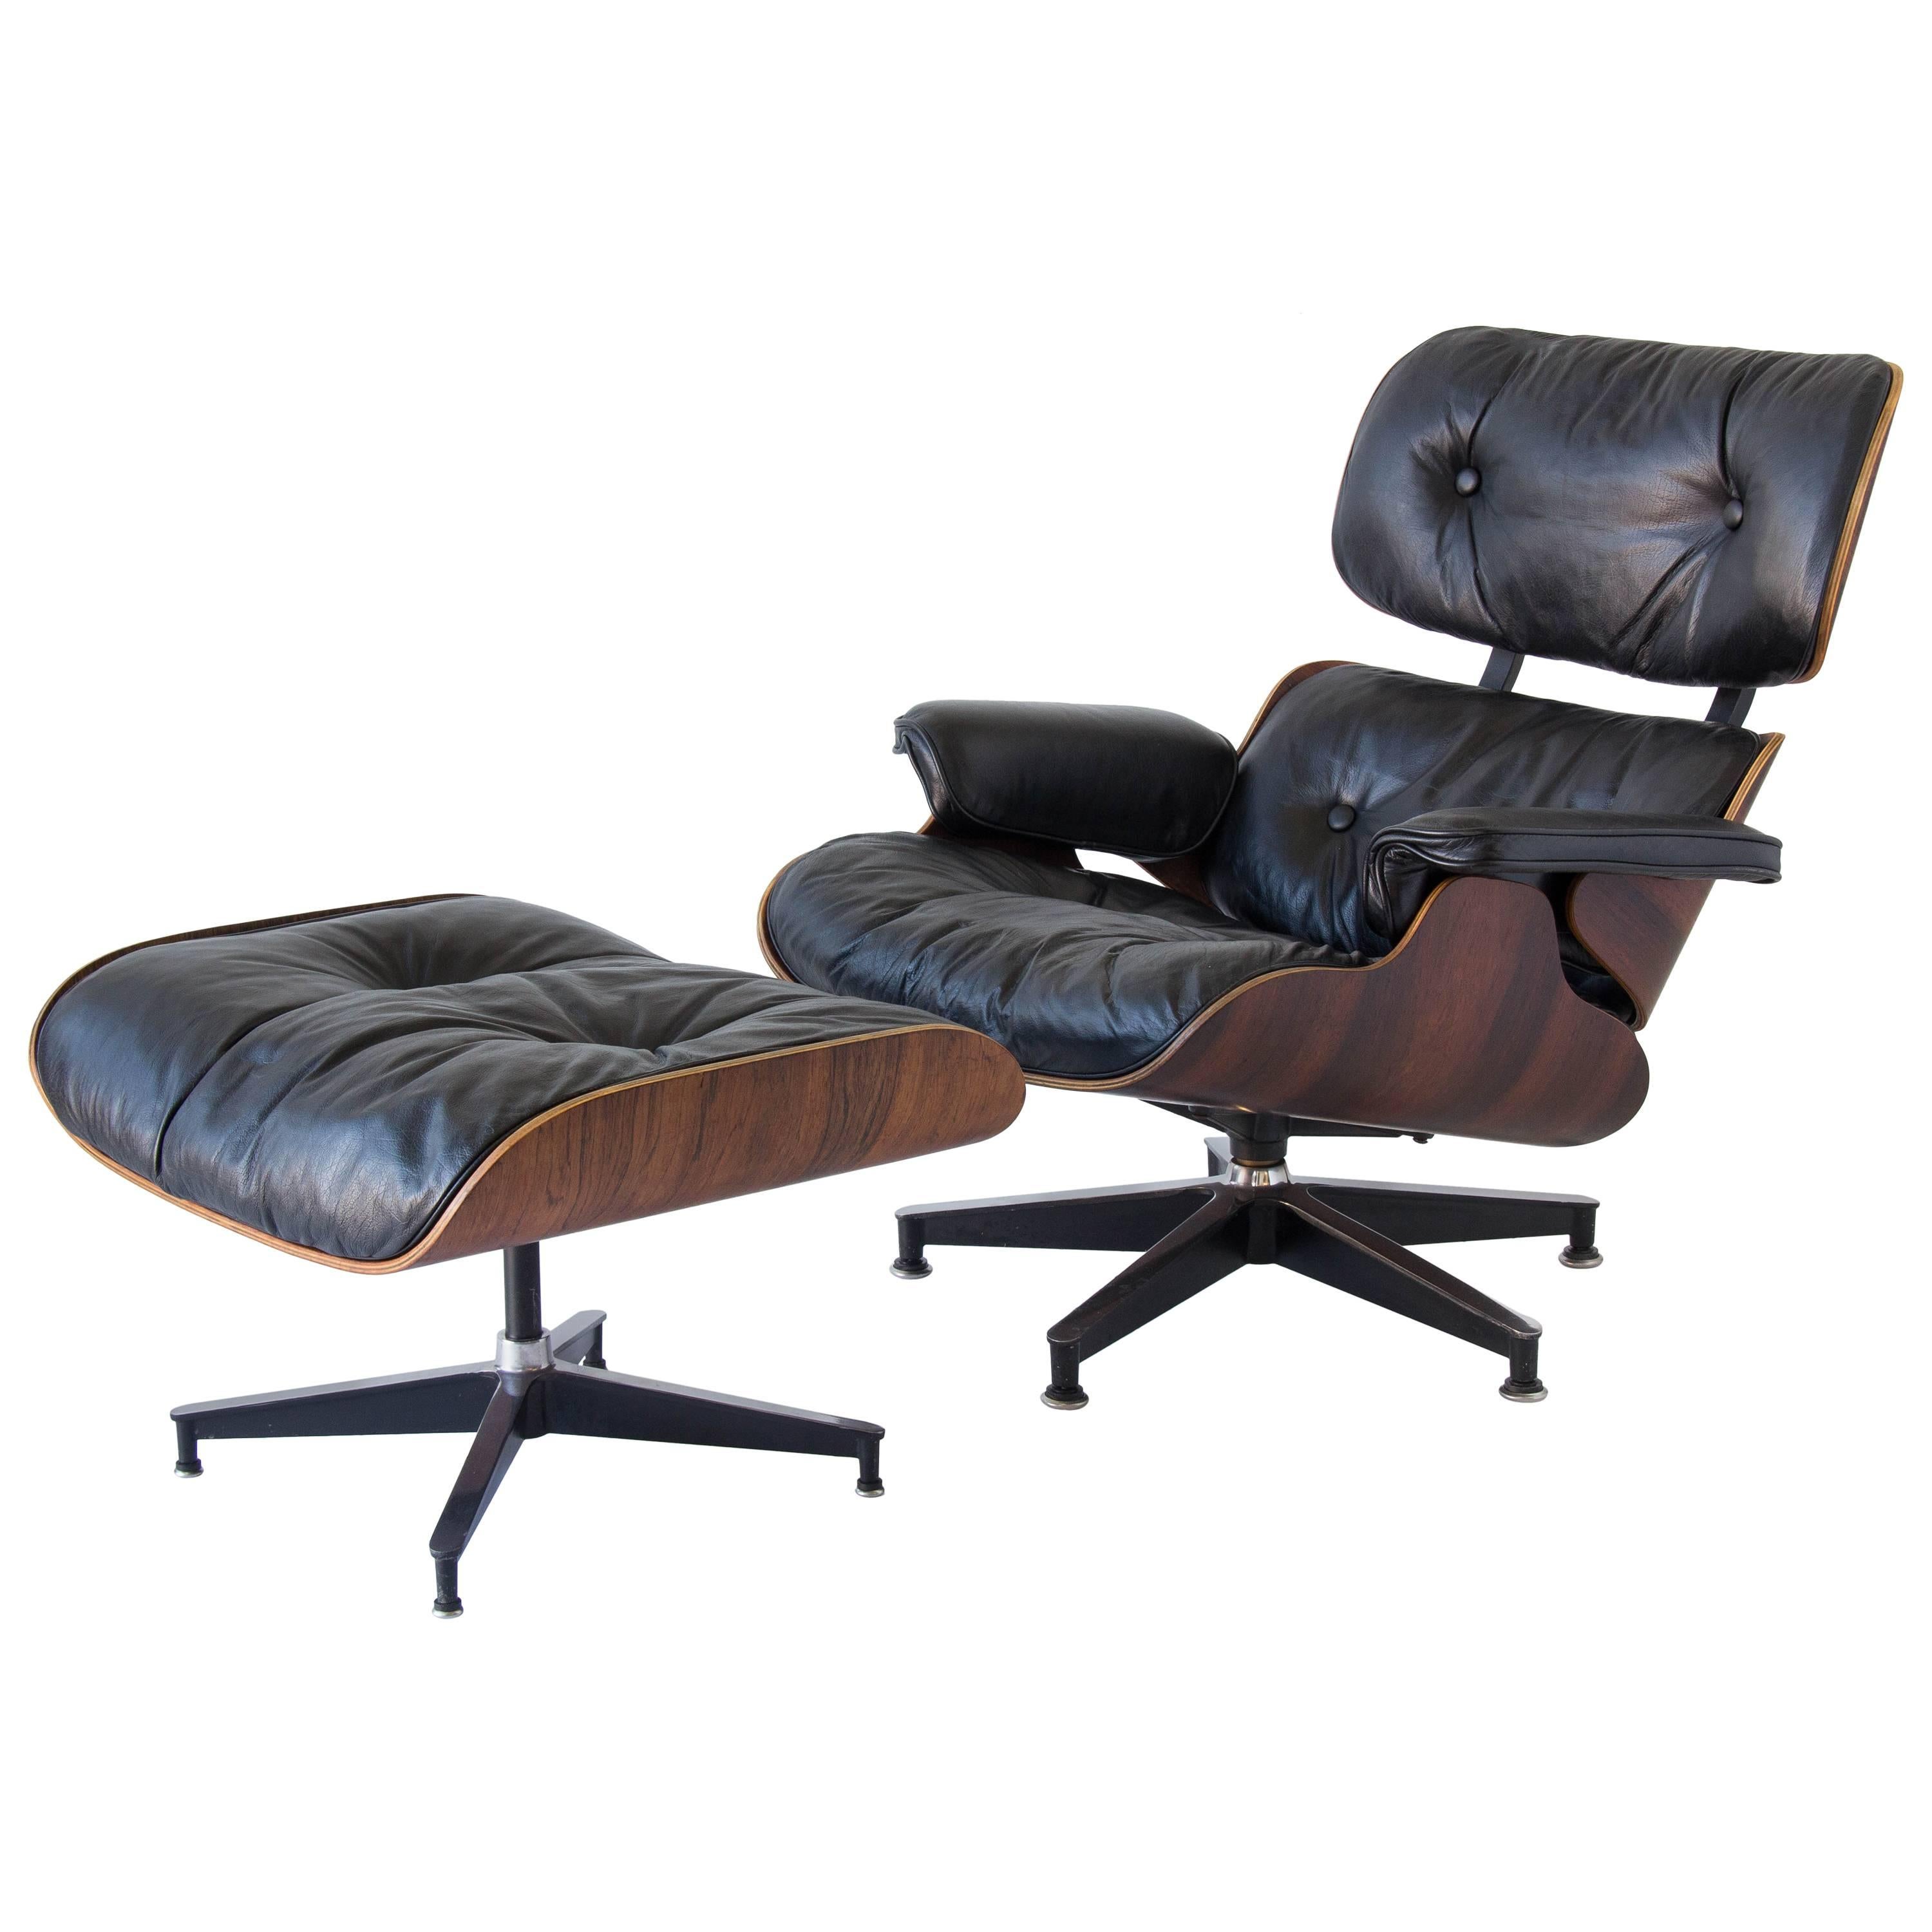 1960s Eames 670/671 Lounge Chair with Ottoman